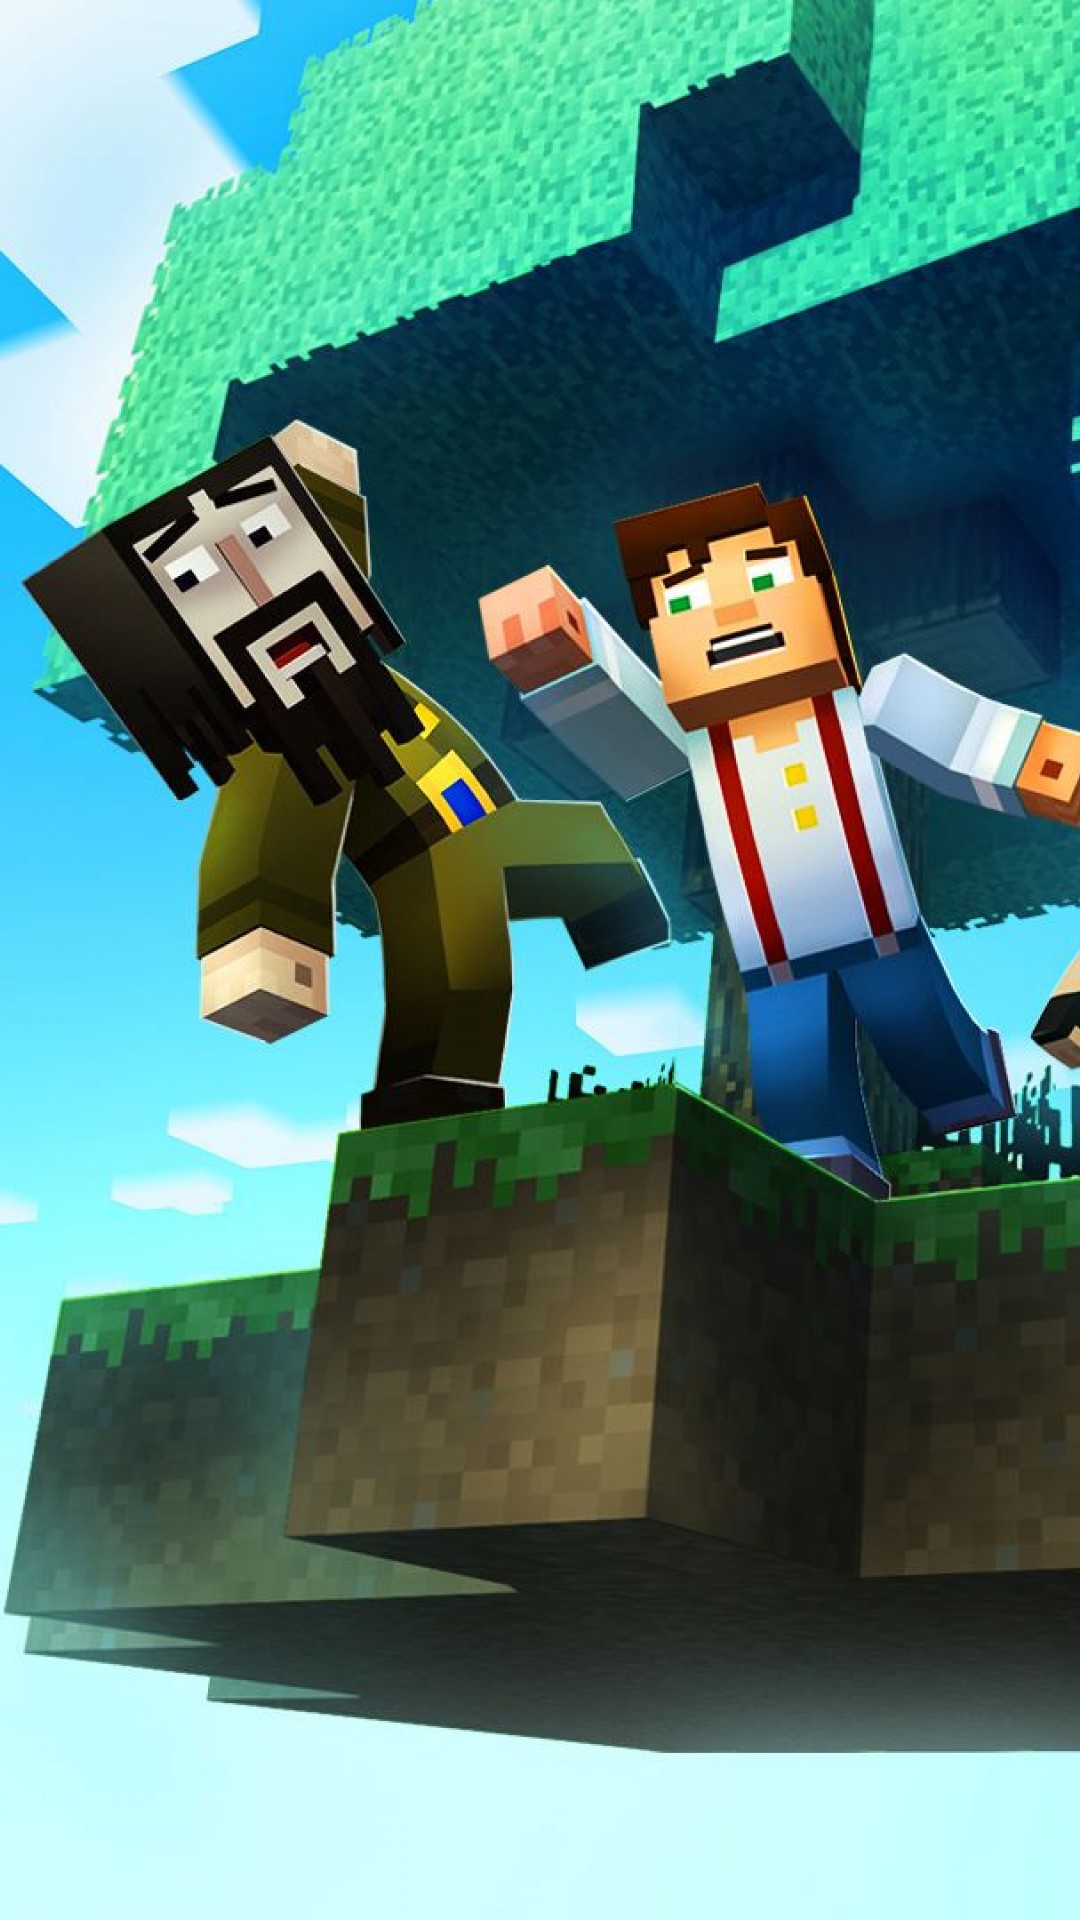 Google Android Minecraft Story Mode Season 1 Episode 5 Hd Wallpaper Backgrounds Download